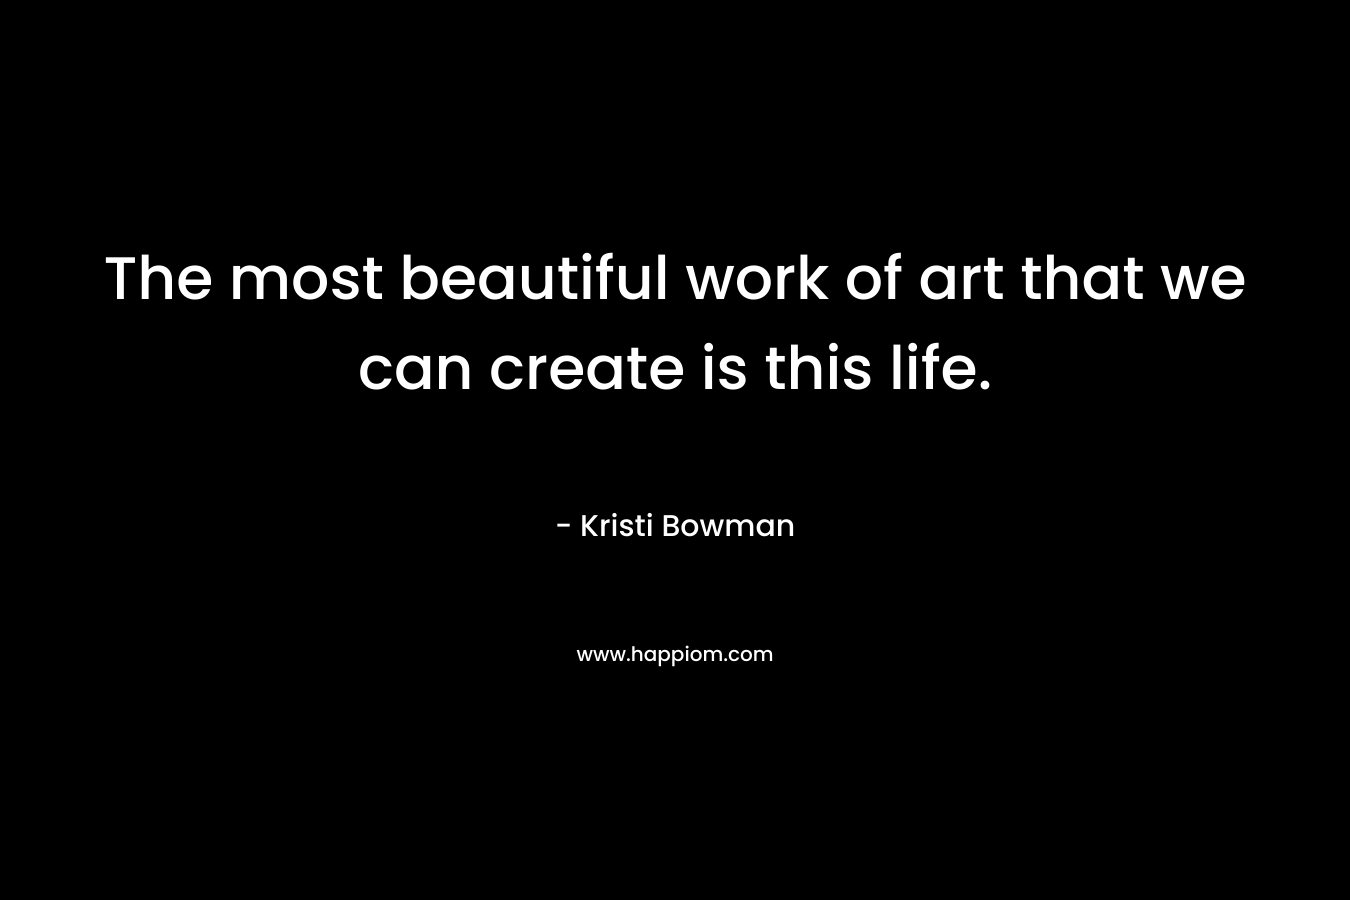 The most beautiful work of art that we can create is this life.